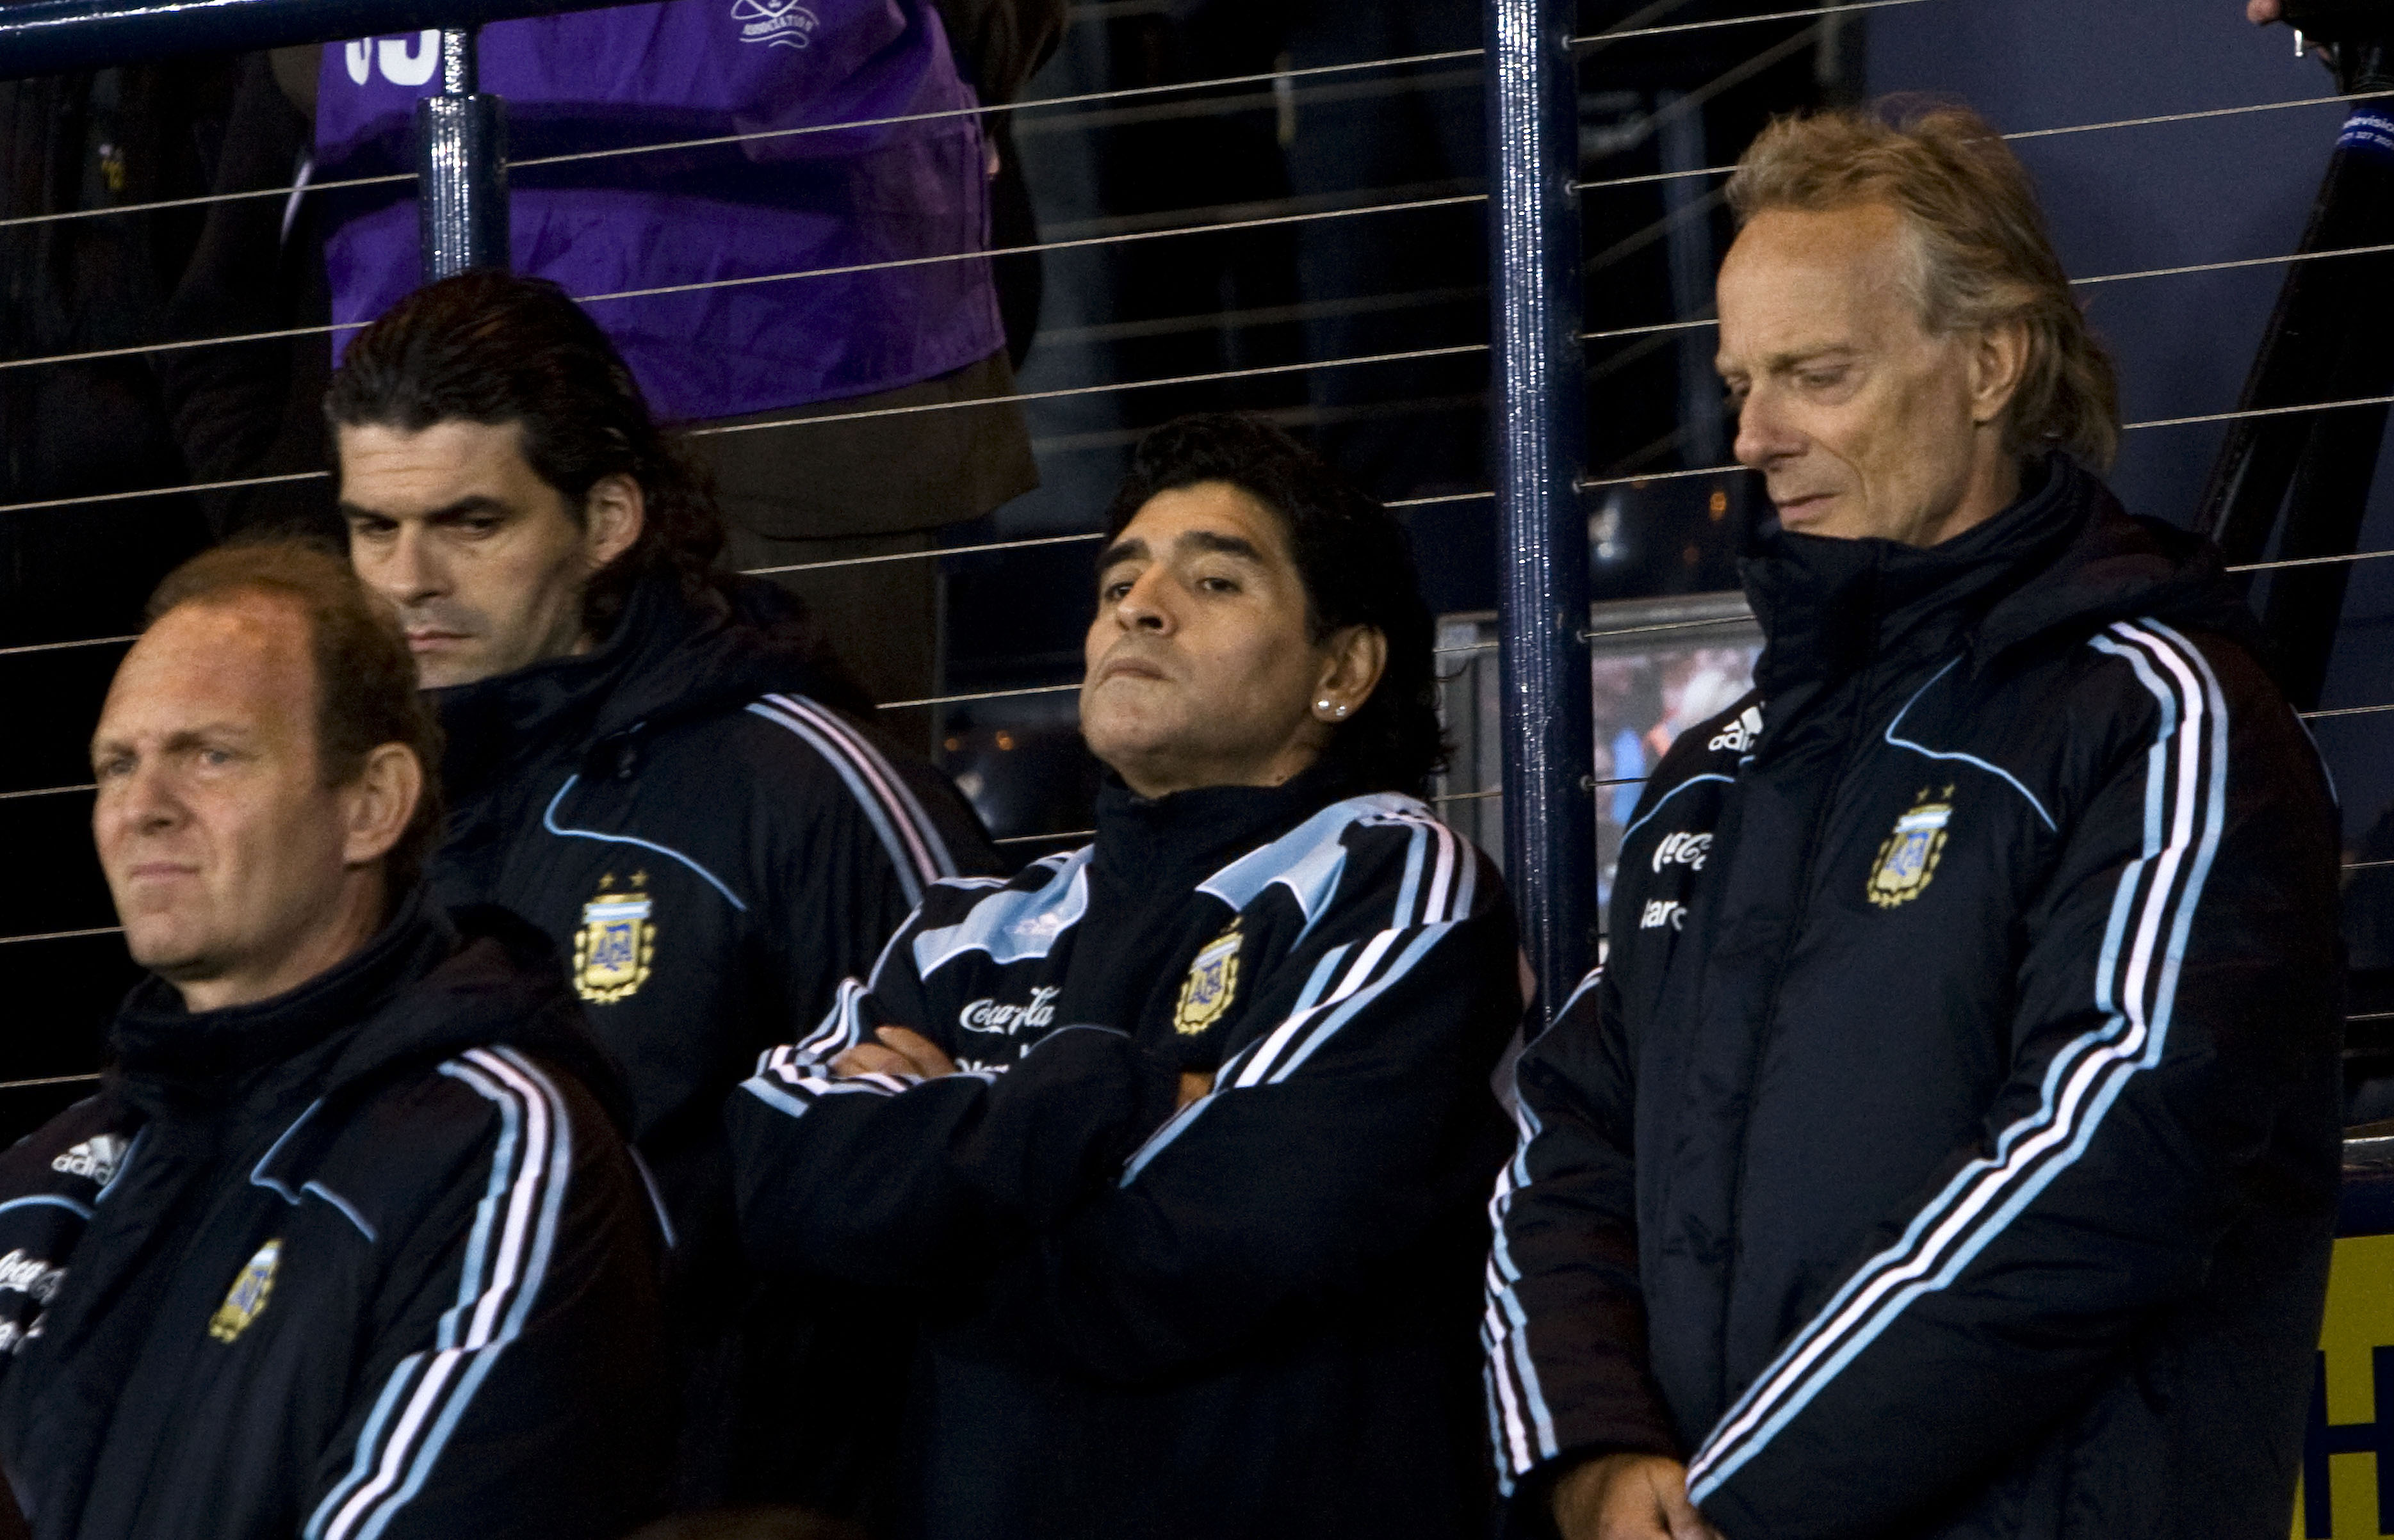 Maradona won the World Cup with Argentina as a player and later returned to coach the national side. (Image: SNS)